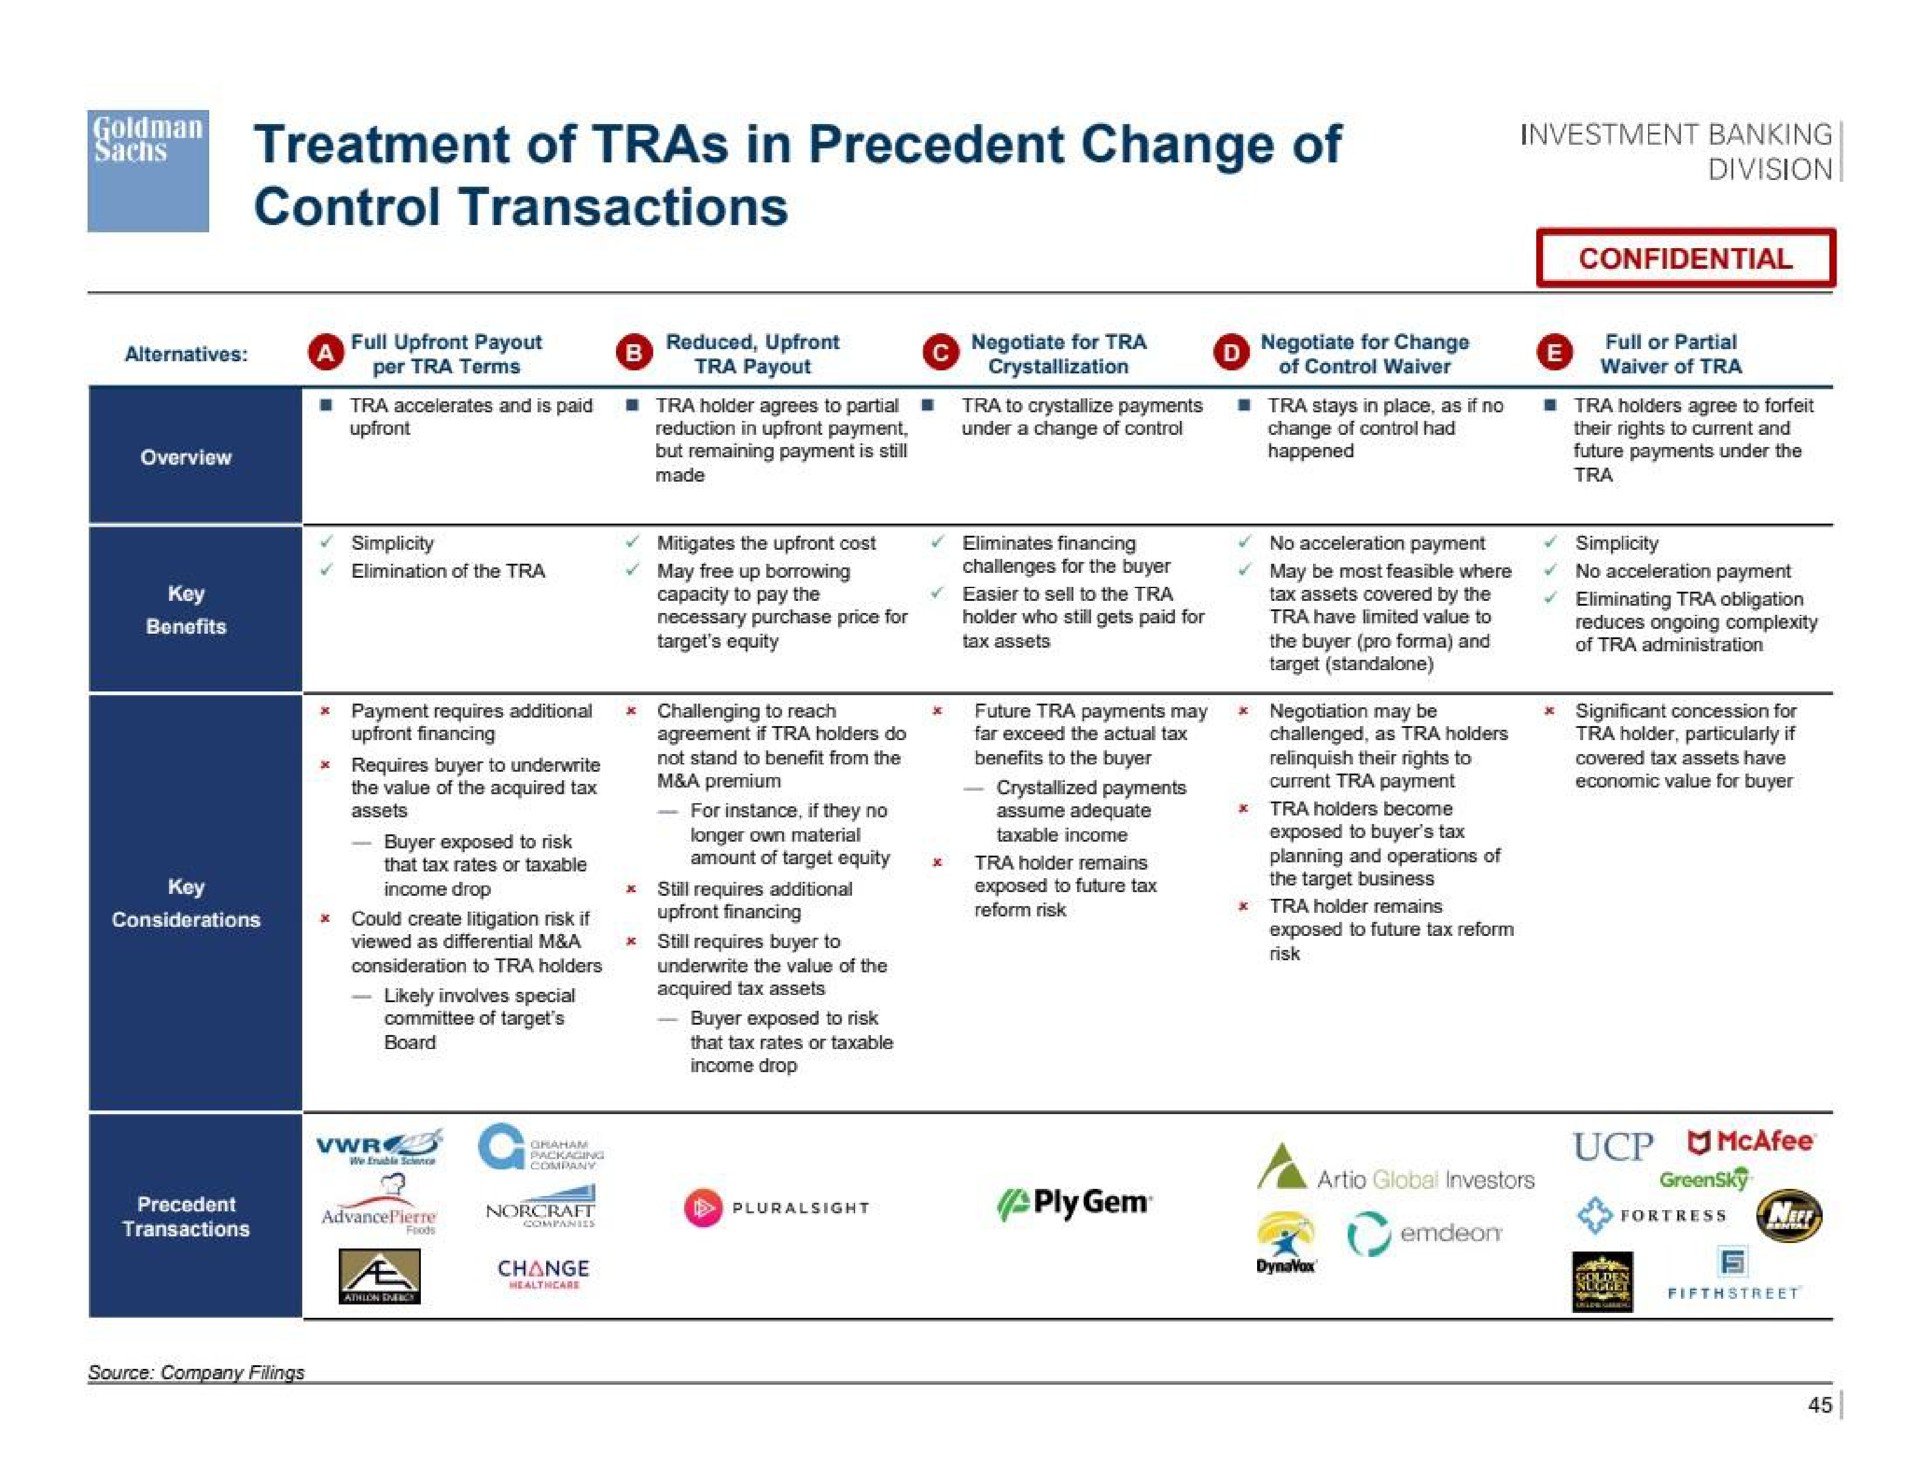 treatment of in precedent change of control transactions ply gem | Goldman Sachs